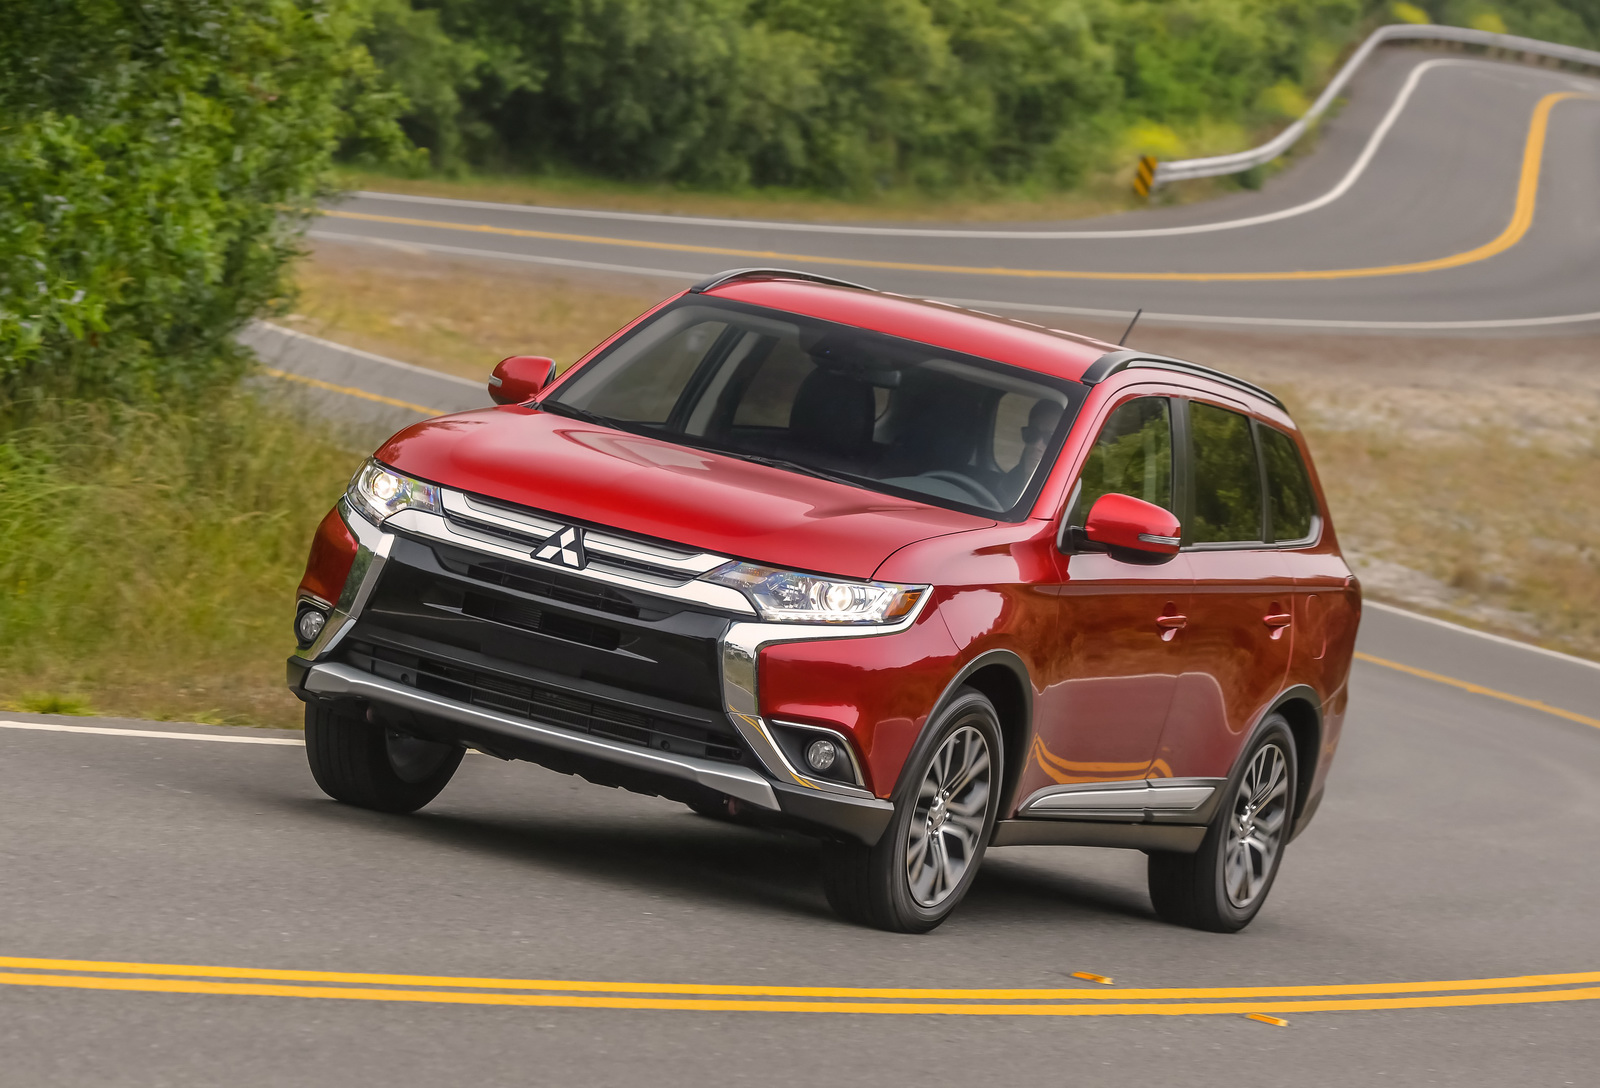 2016 Mitsubishi Outlander Priced From 22,995*, 200 Less